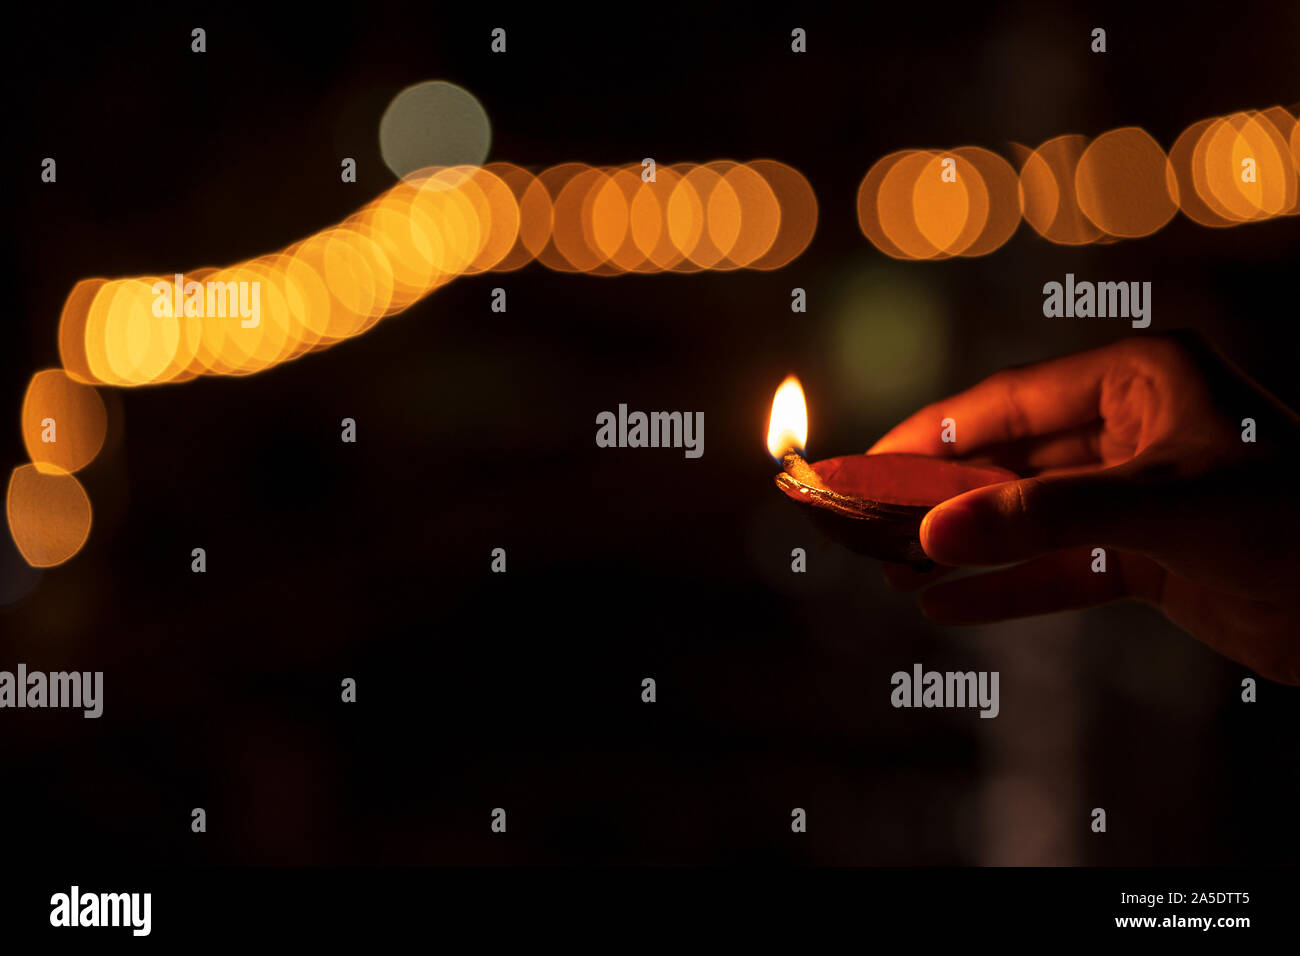 Diwali - the festival of lights. Person holding diya or clay oil lamp with yellow orange bokeh & space for text isolated in black background. Stock Photo